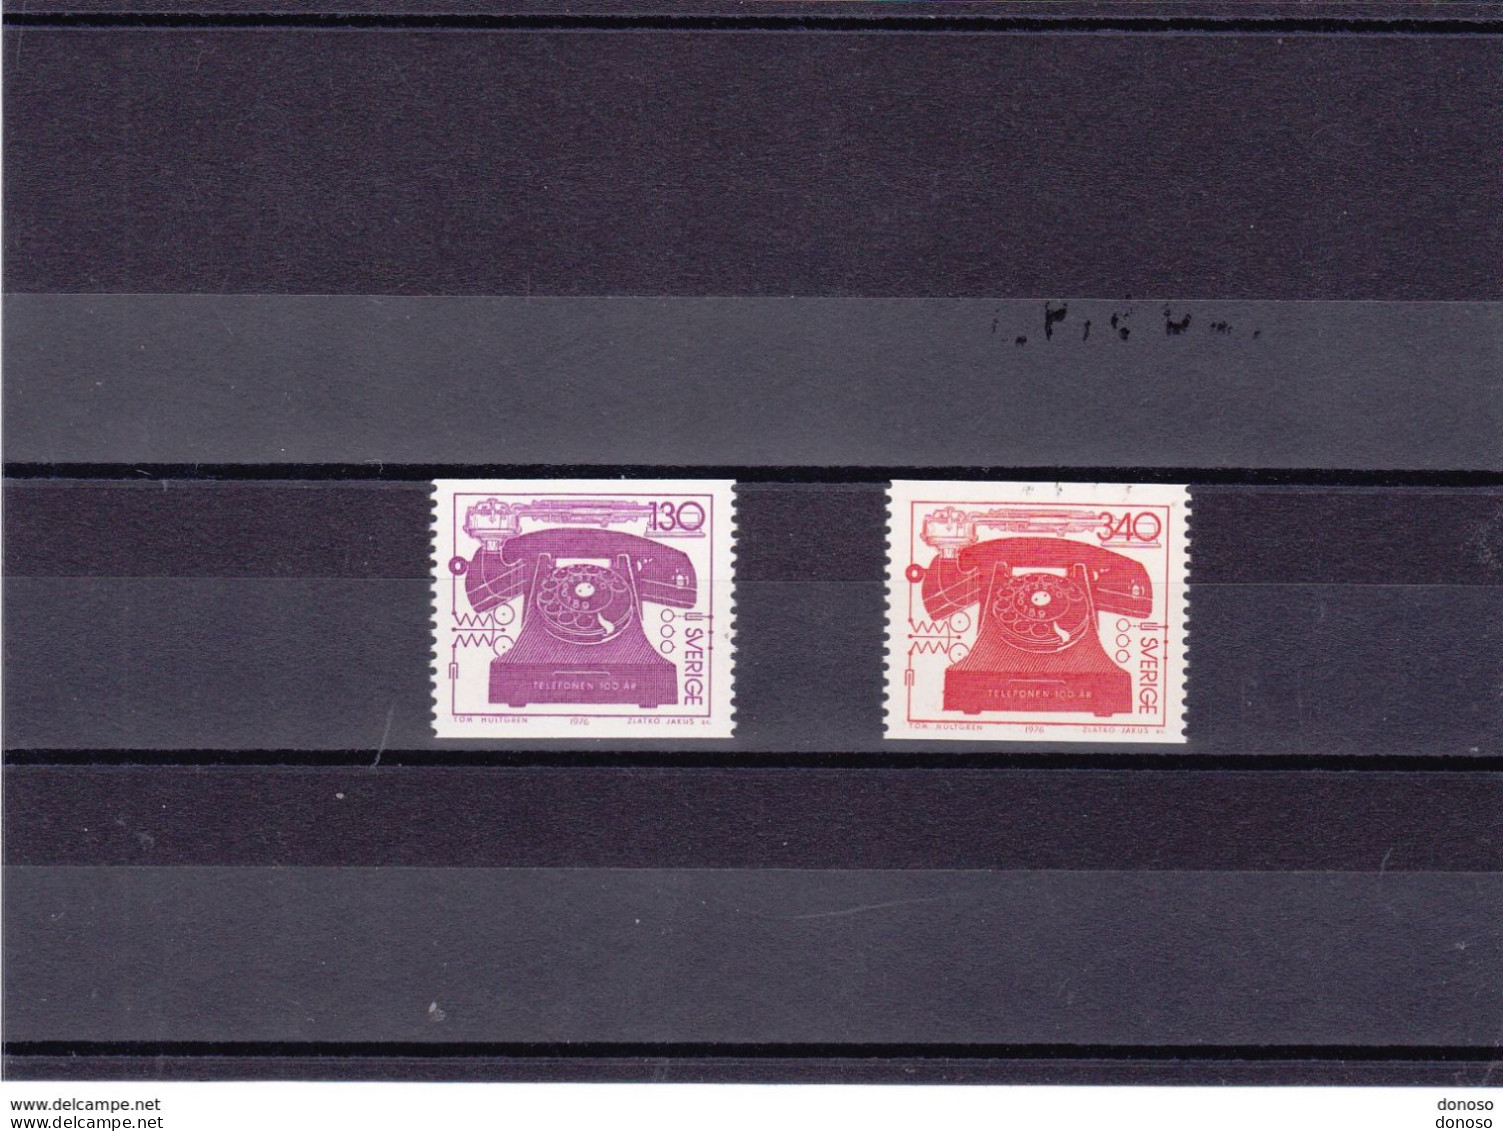 SUEDE 1976  TELEPHONE Yvert 919-920, Michel 939-940 NEUF** MNH Cote 3 Euros - Unused Stamps